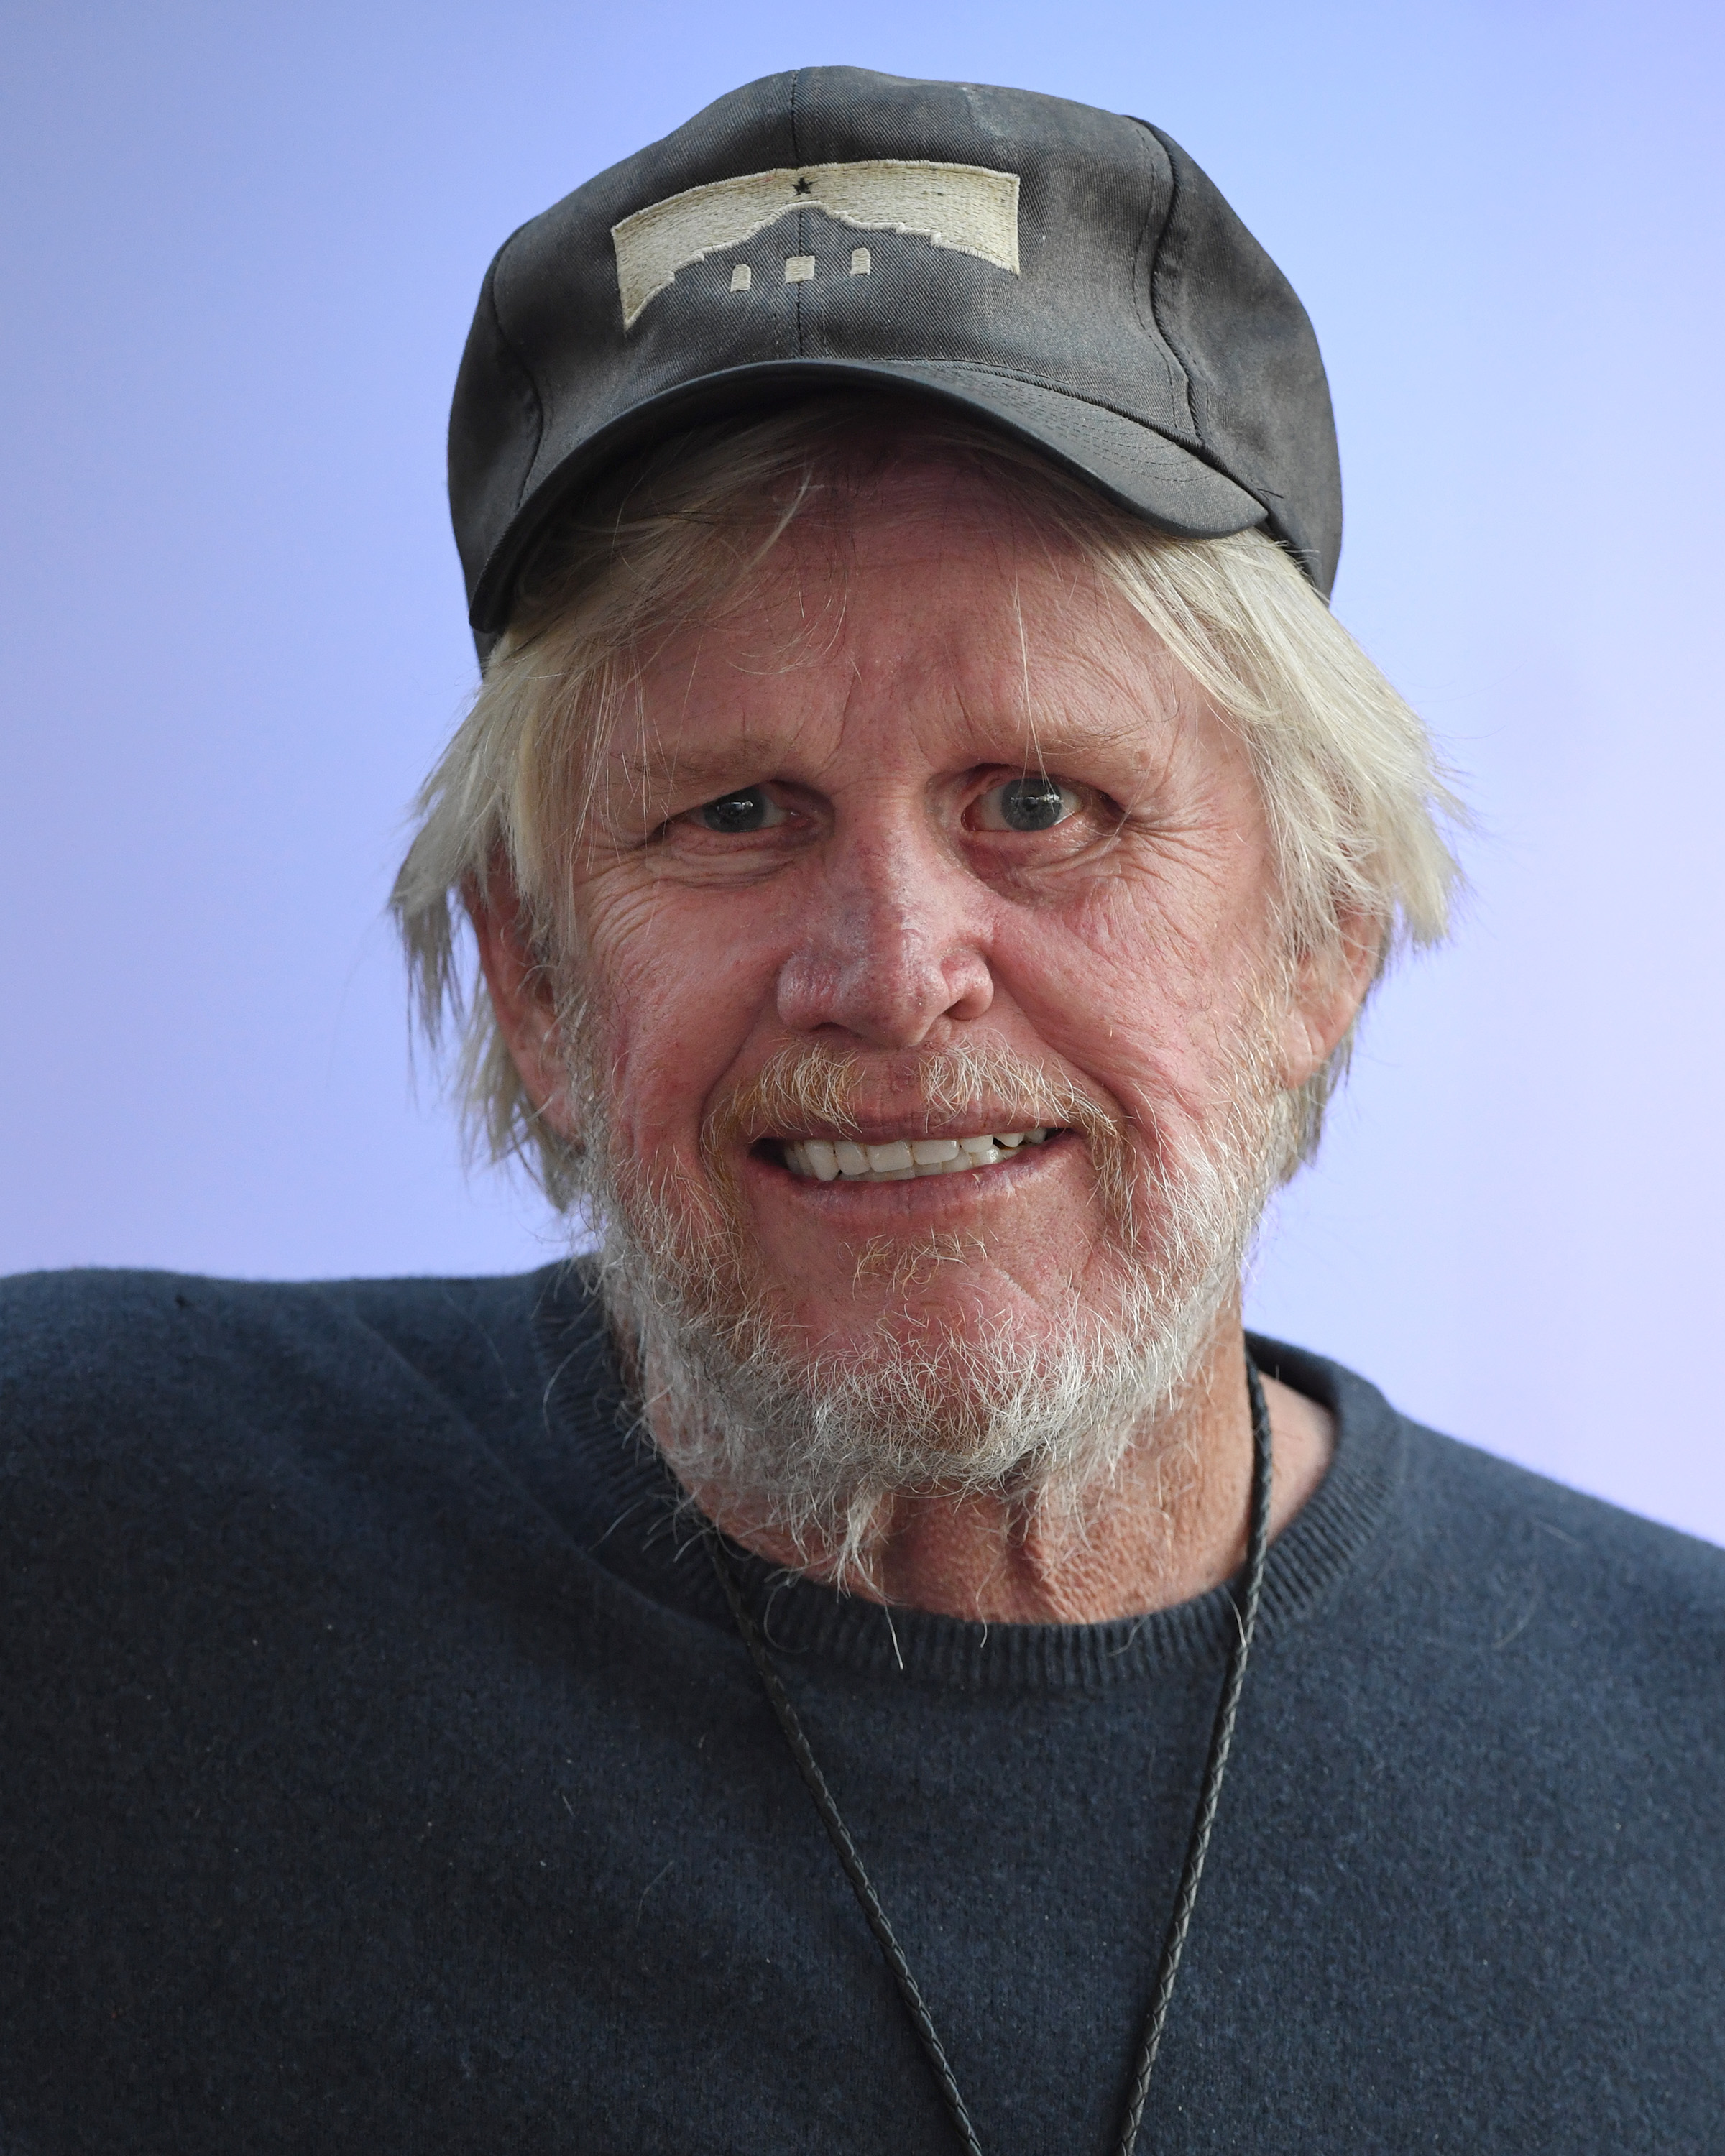 Gary Busey pictured at The Comedy Chateau on May 12, 2021 in North Hollywood, California | Source: Getty Images